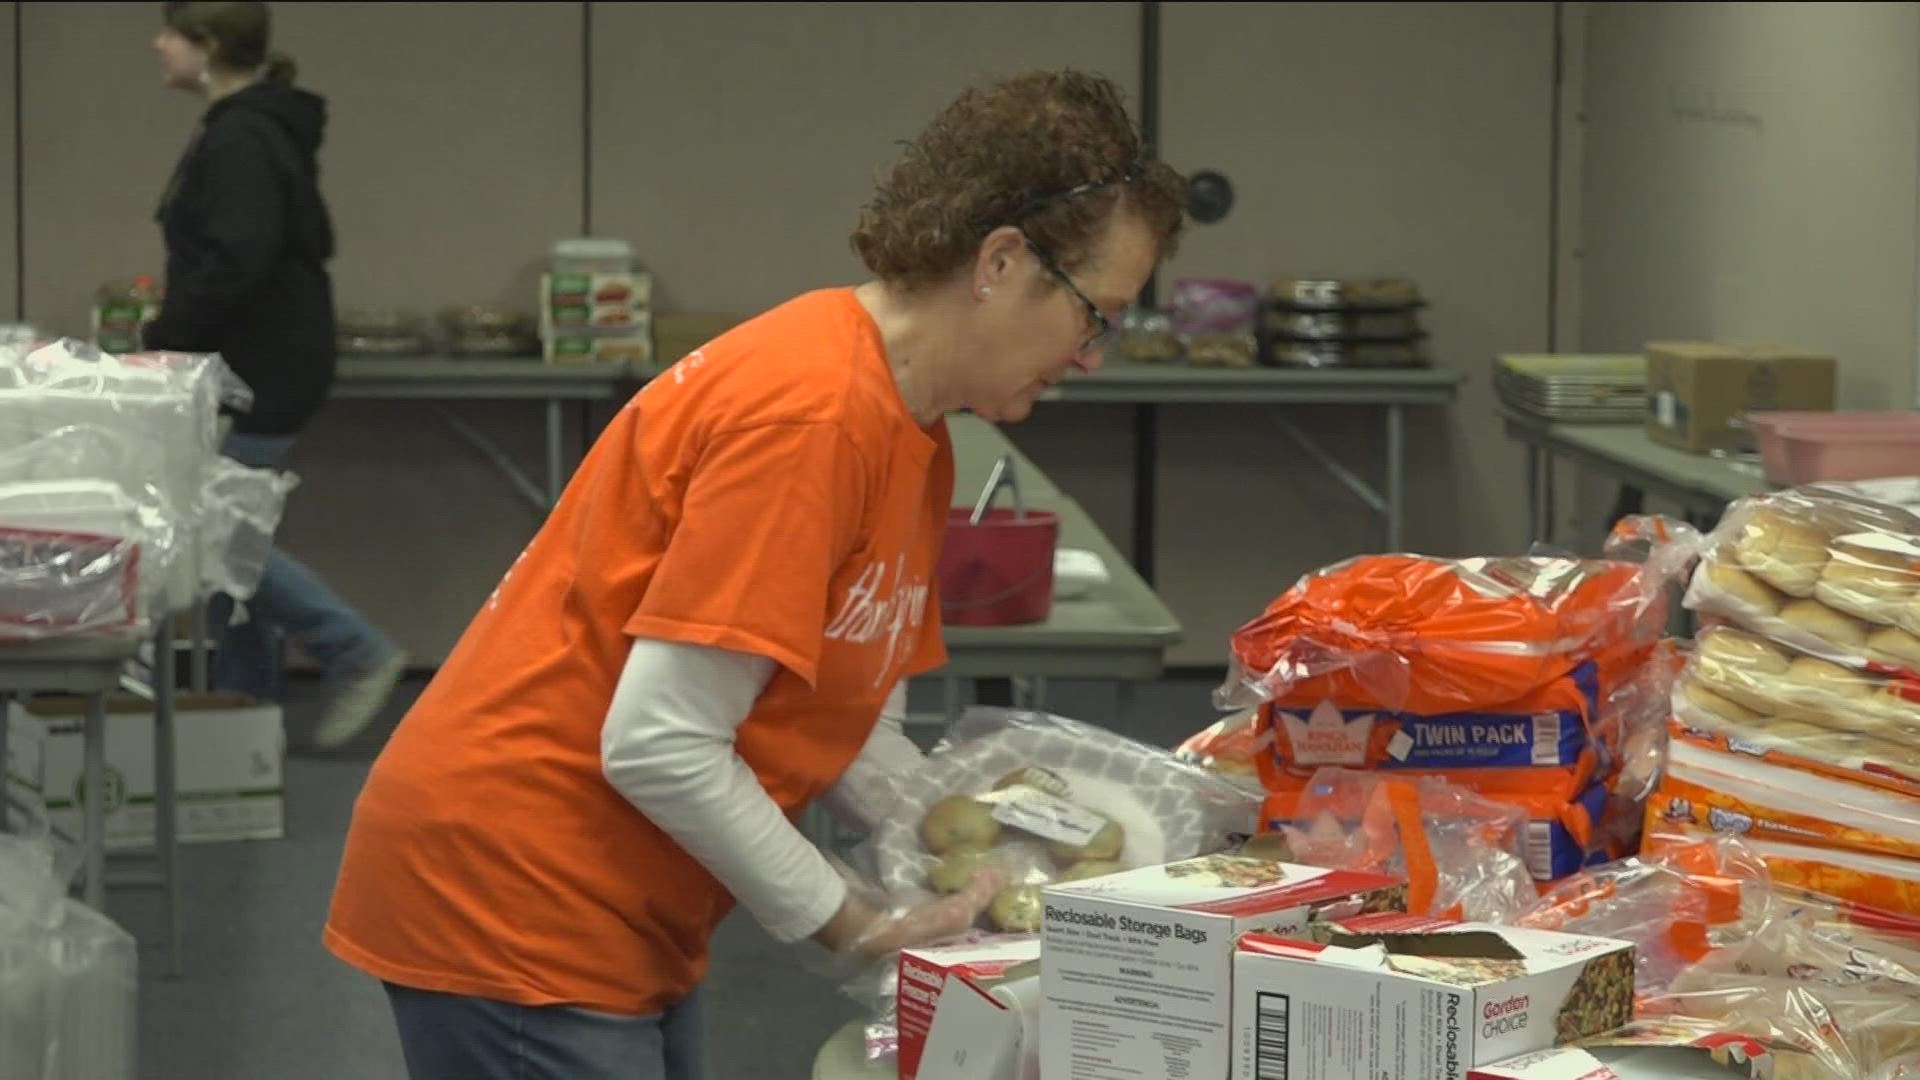 Stonebridge Church in Findlay offers free Thanksgiving meals Thursday.